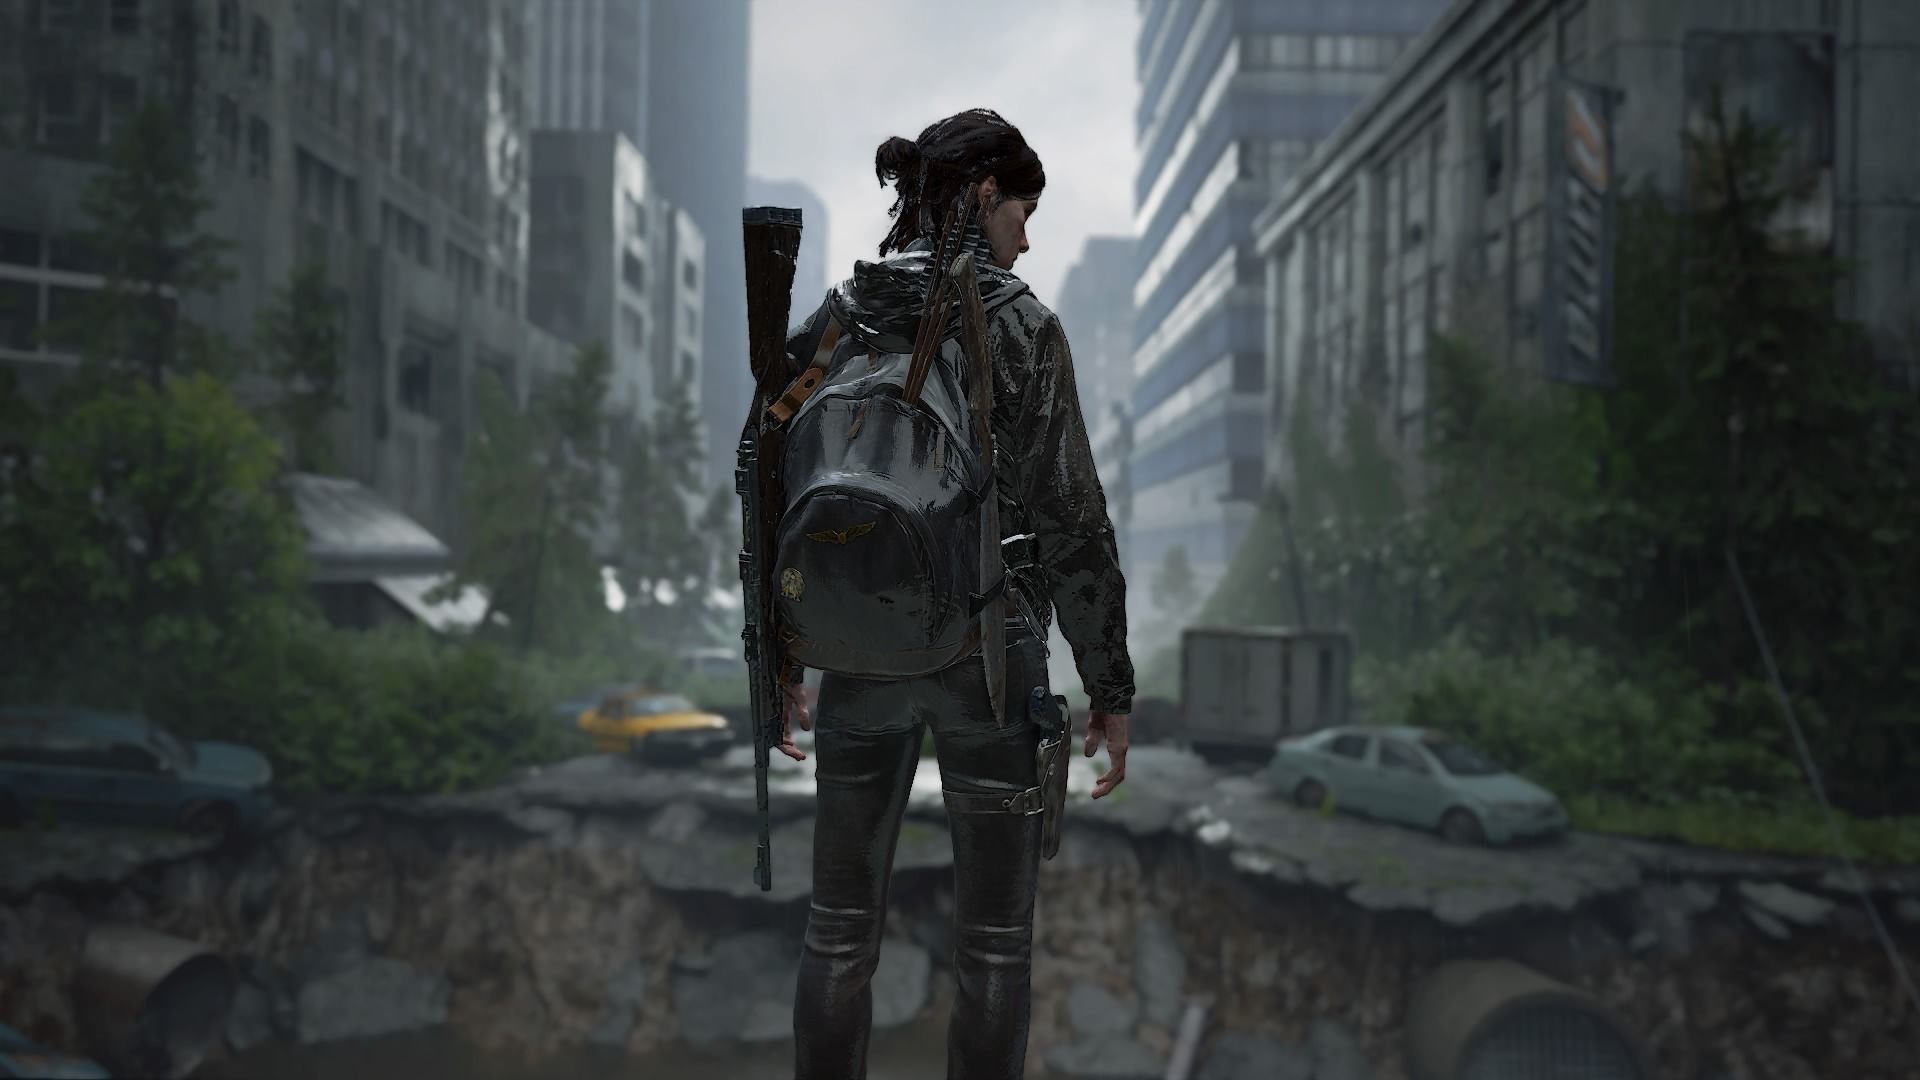 Ellie - The Last of Us [2] wallpaper - Game wallpapers - #26452